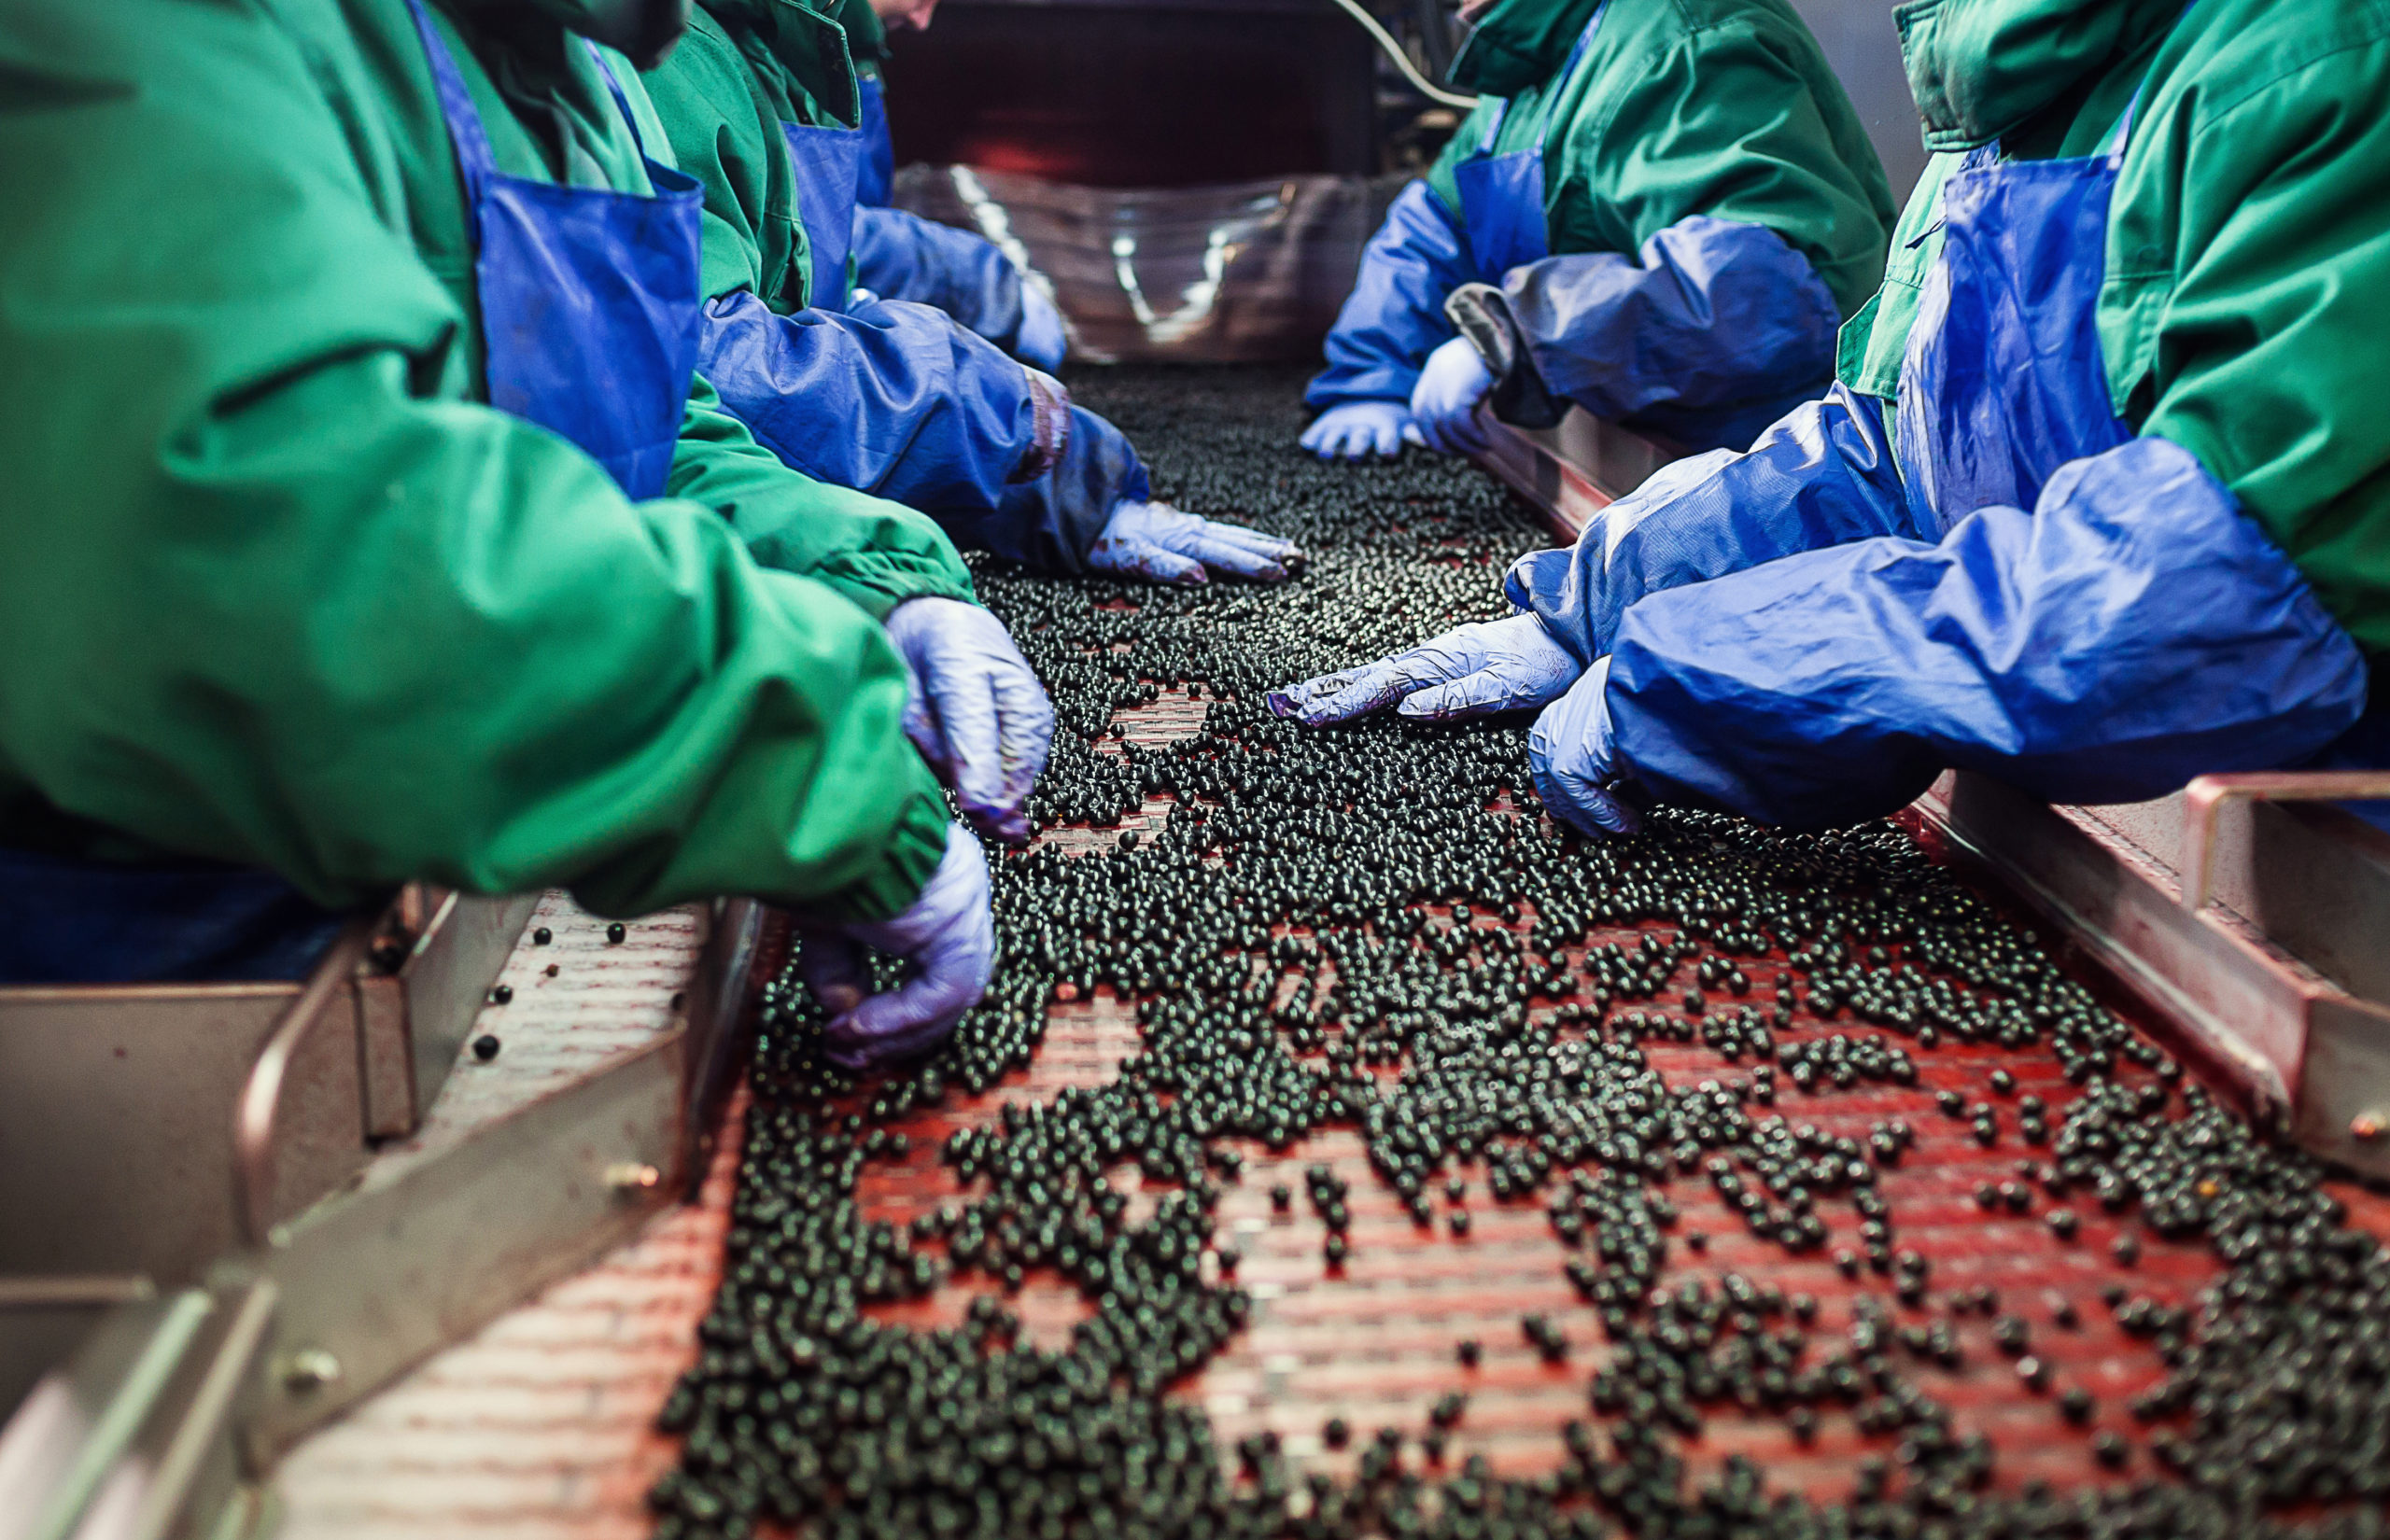 Unrecognizable workers hands in protective blue gloves make selection of frozen berries.Factory for freezing and packing of fruits and vegetables.Low light and visible noise.